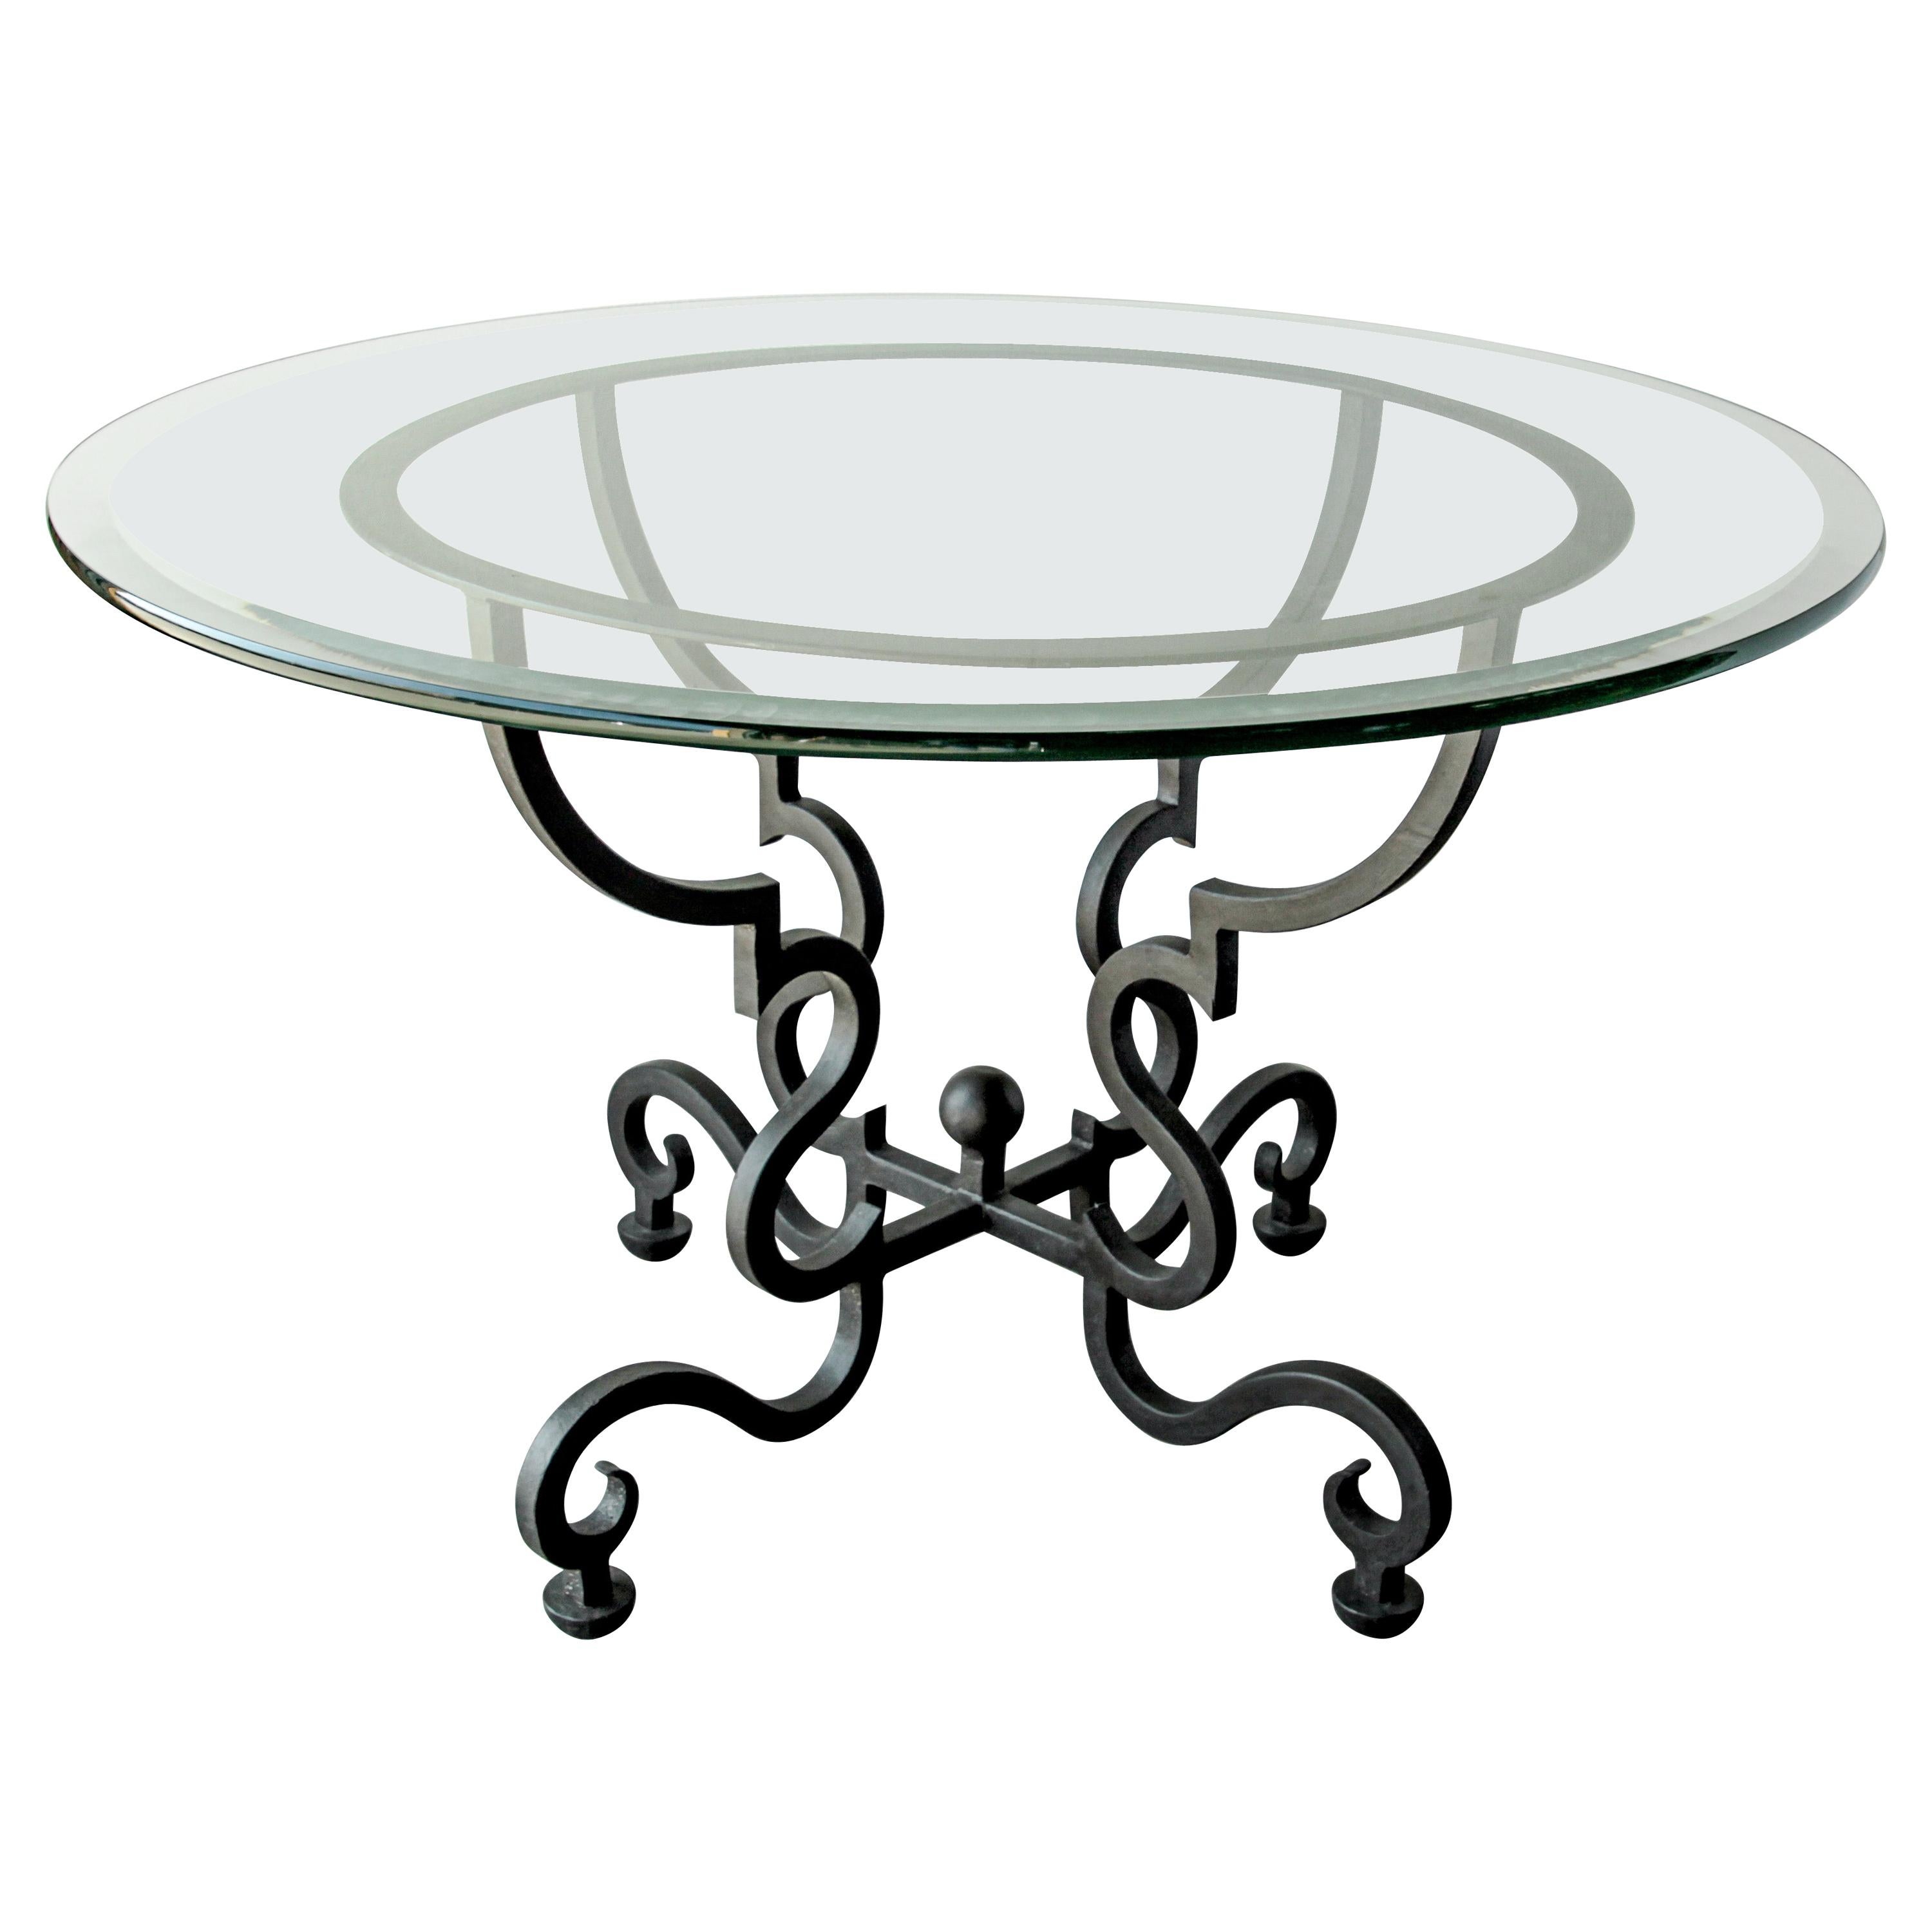 Spanish Round Glass Dining Table on Wrought Iron Base